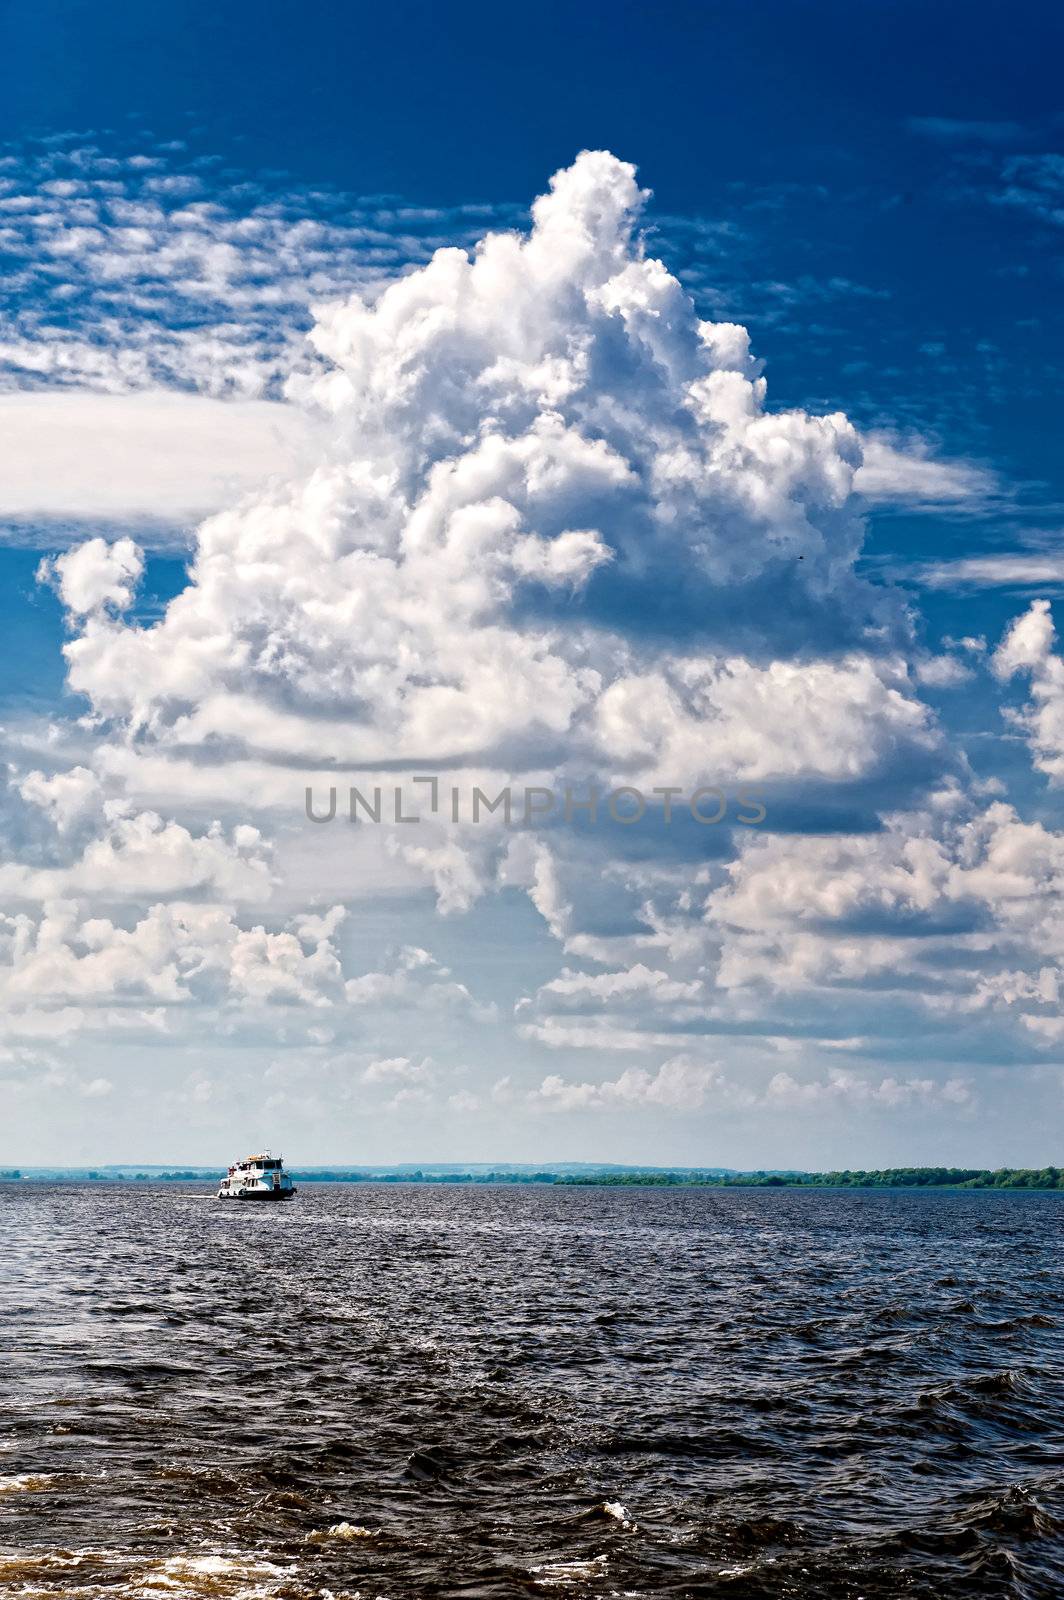 boat on a river. great swirling clouds